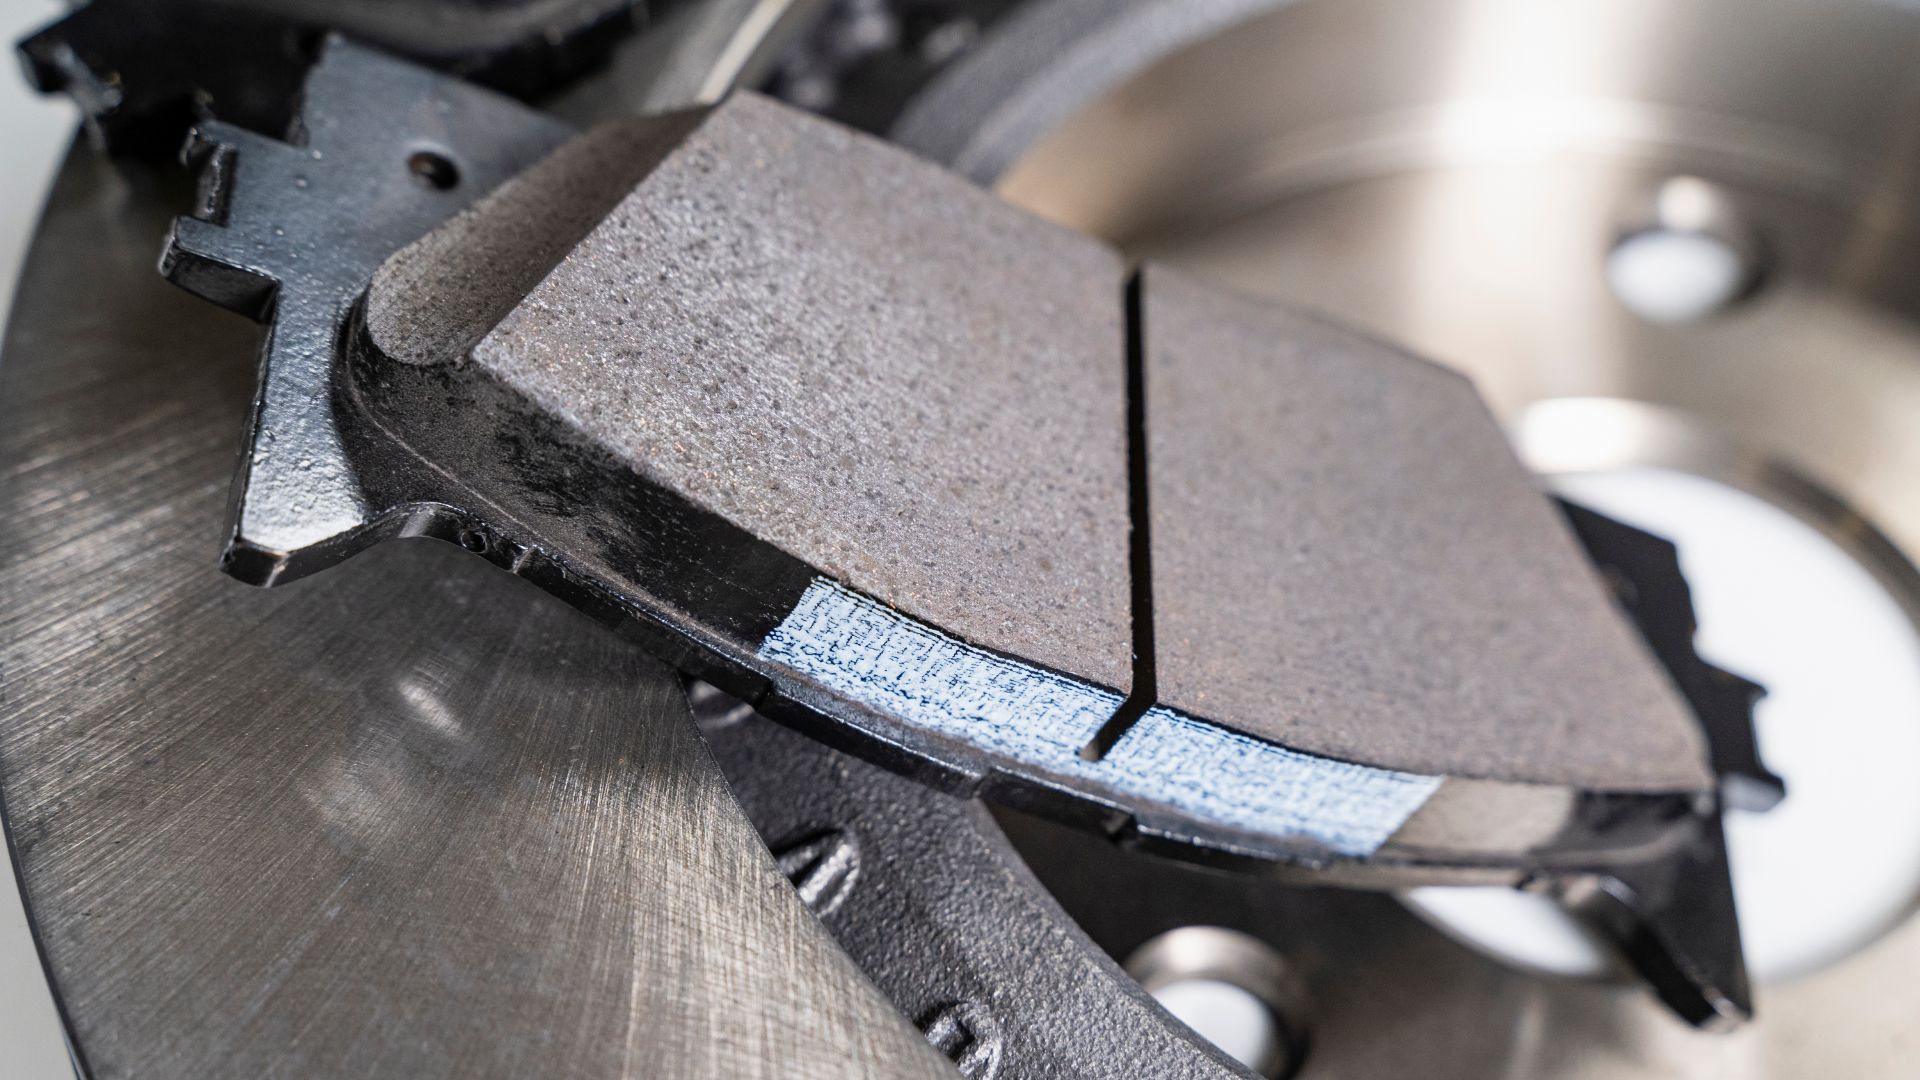 a close up of a brake pad on a motorcycle.